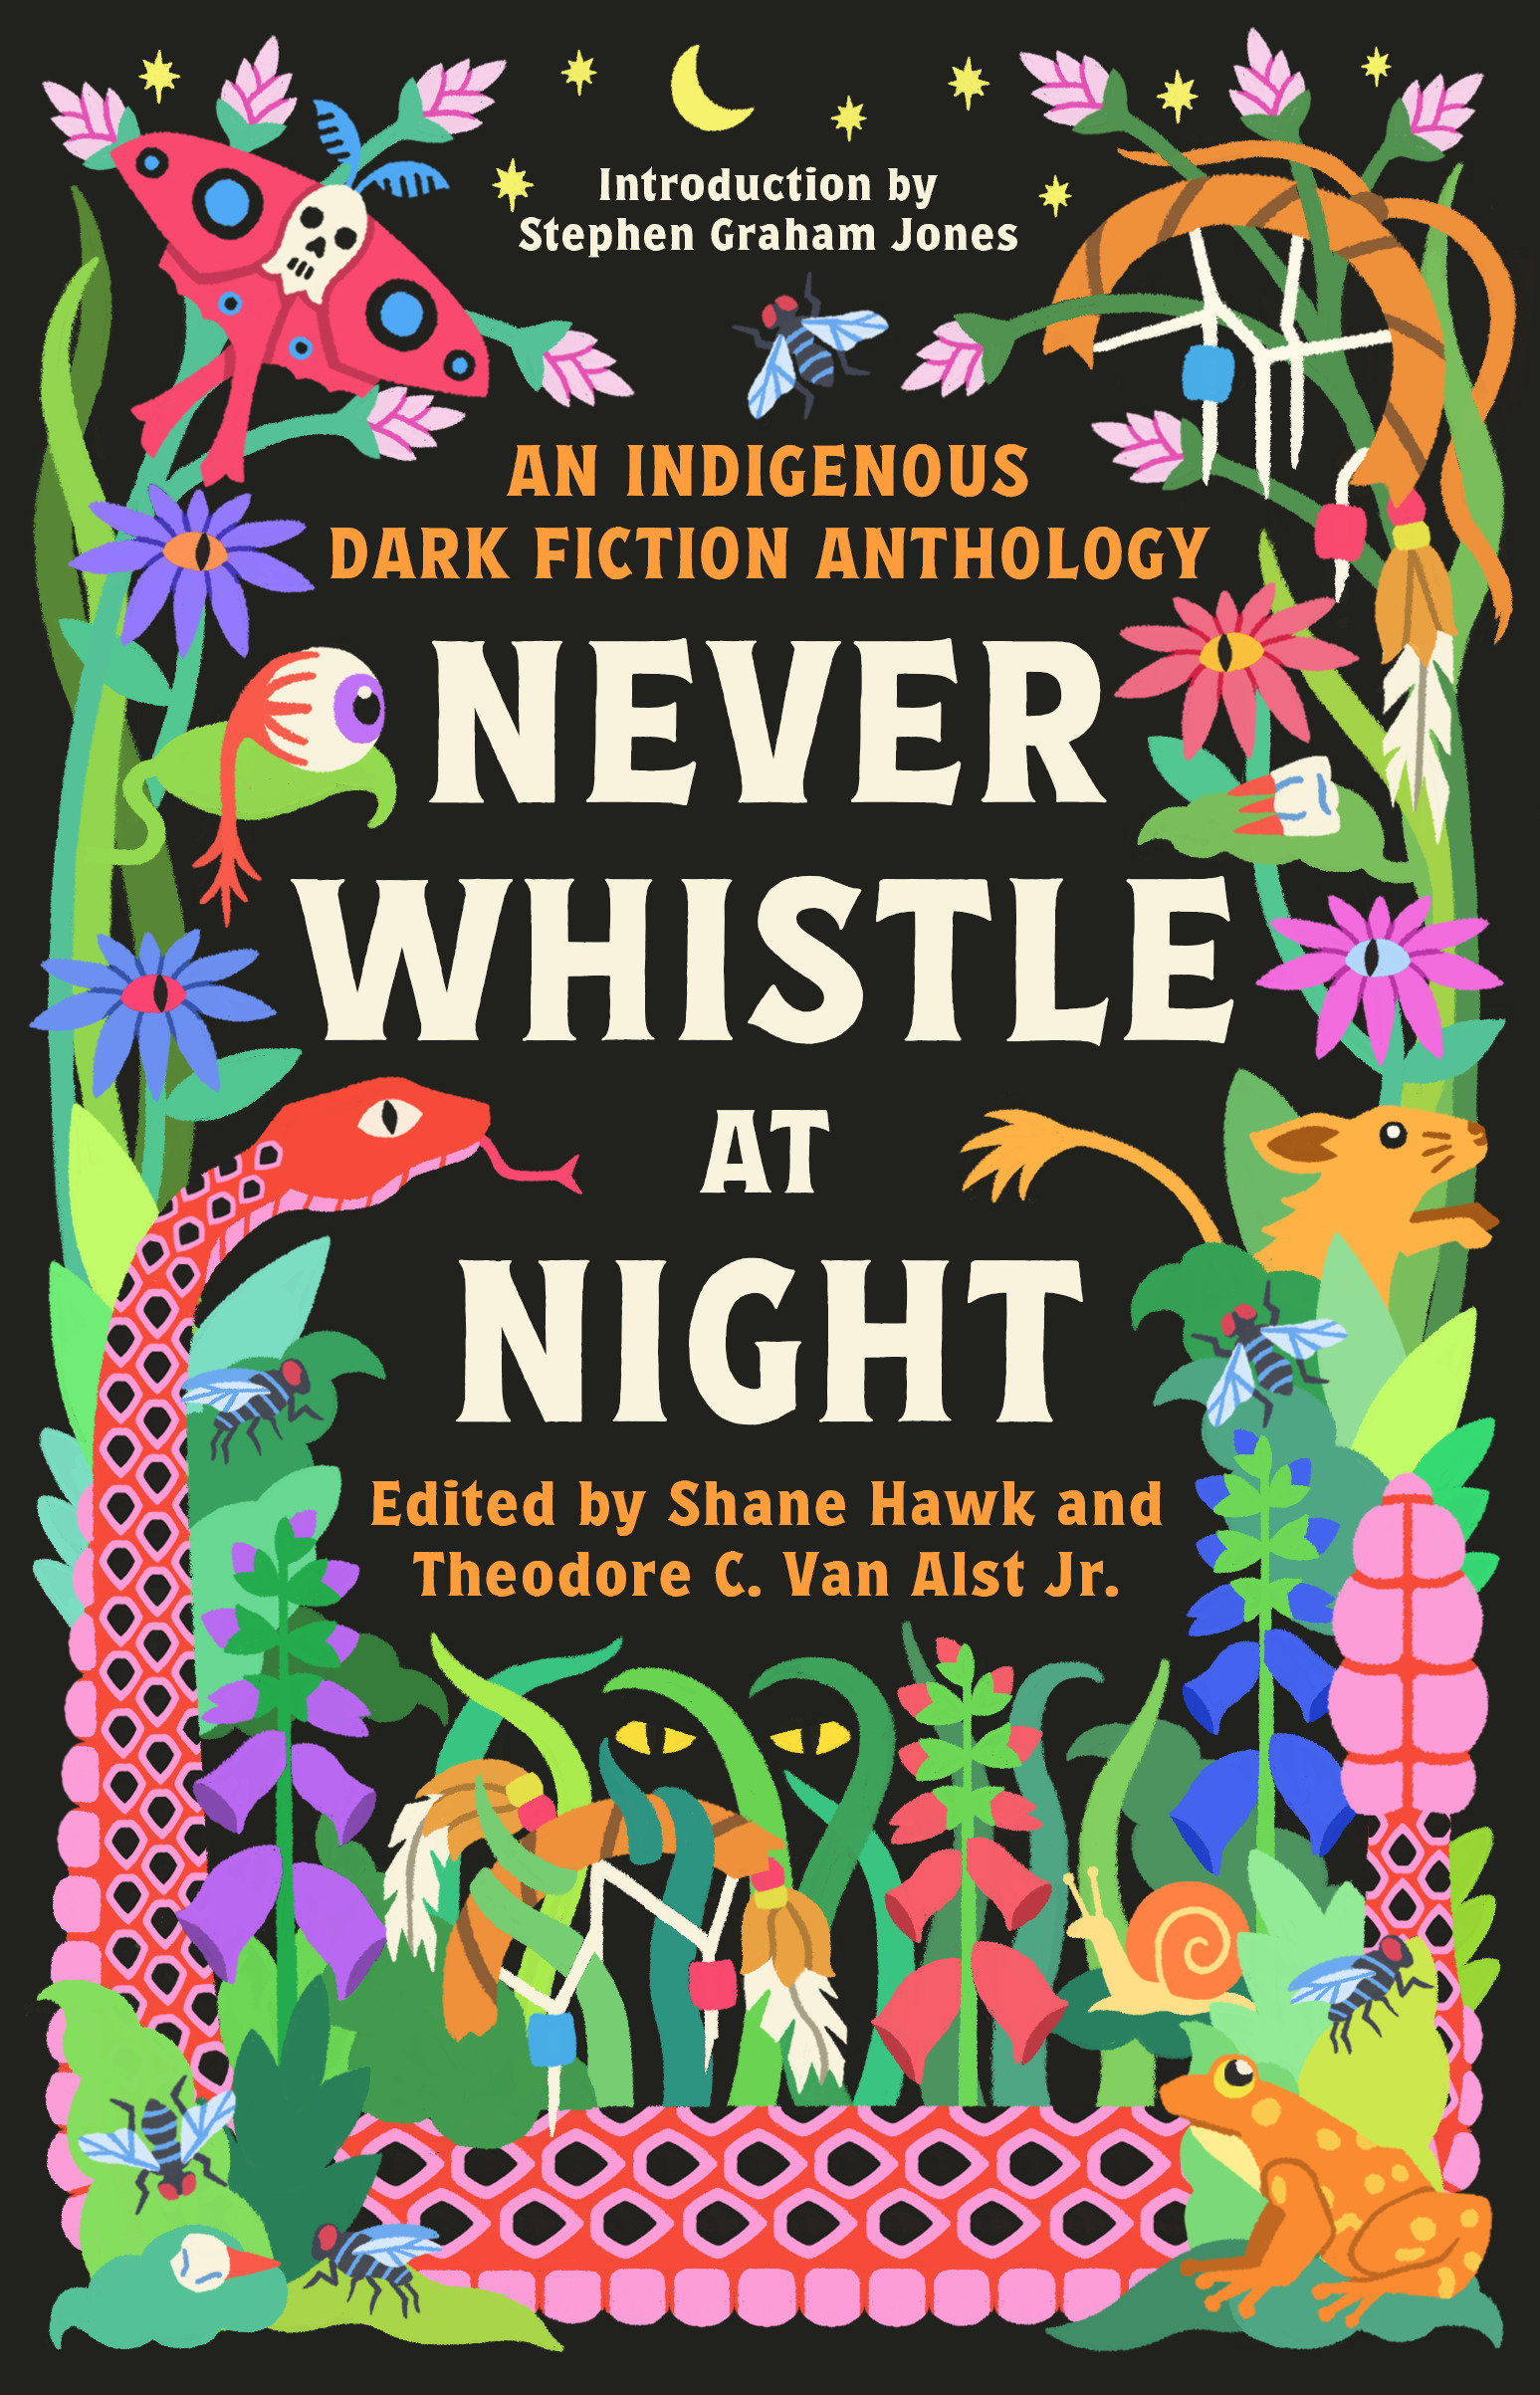 Never Whistle at Night: An Indigenous Dark Fiction Anthology Are You Ready to Be Un-Settled?